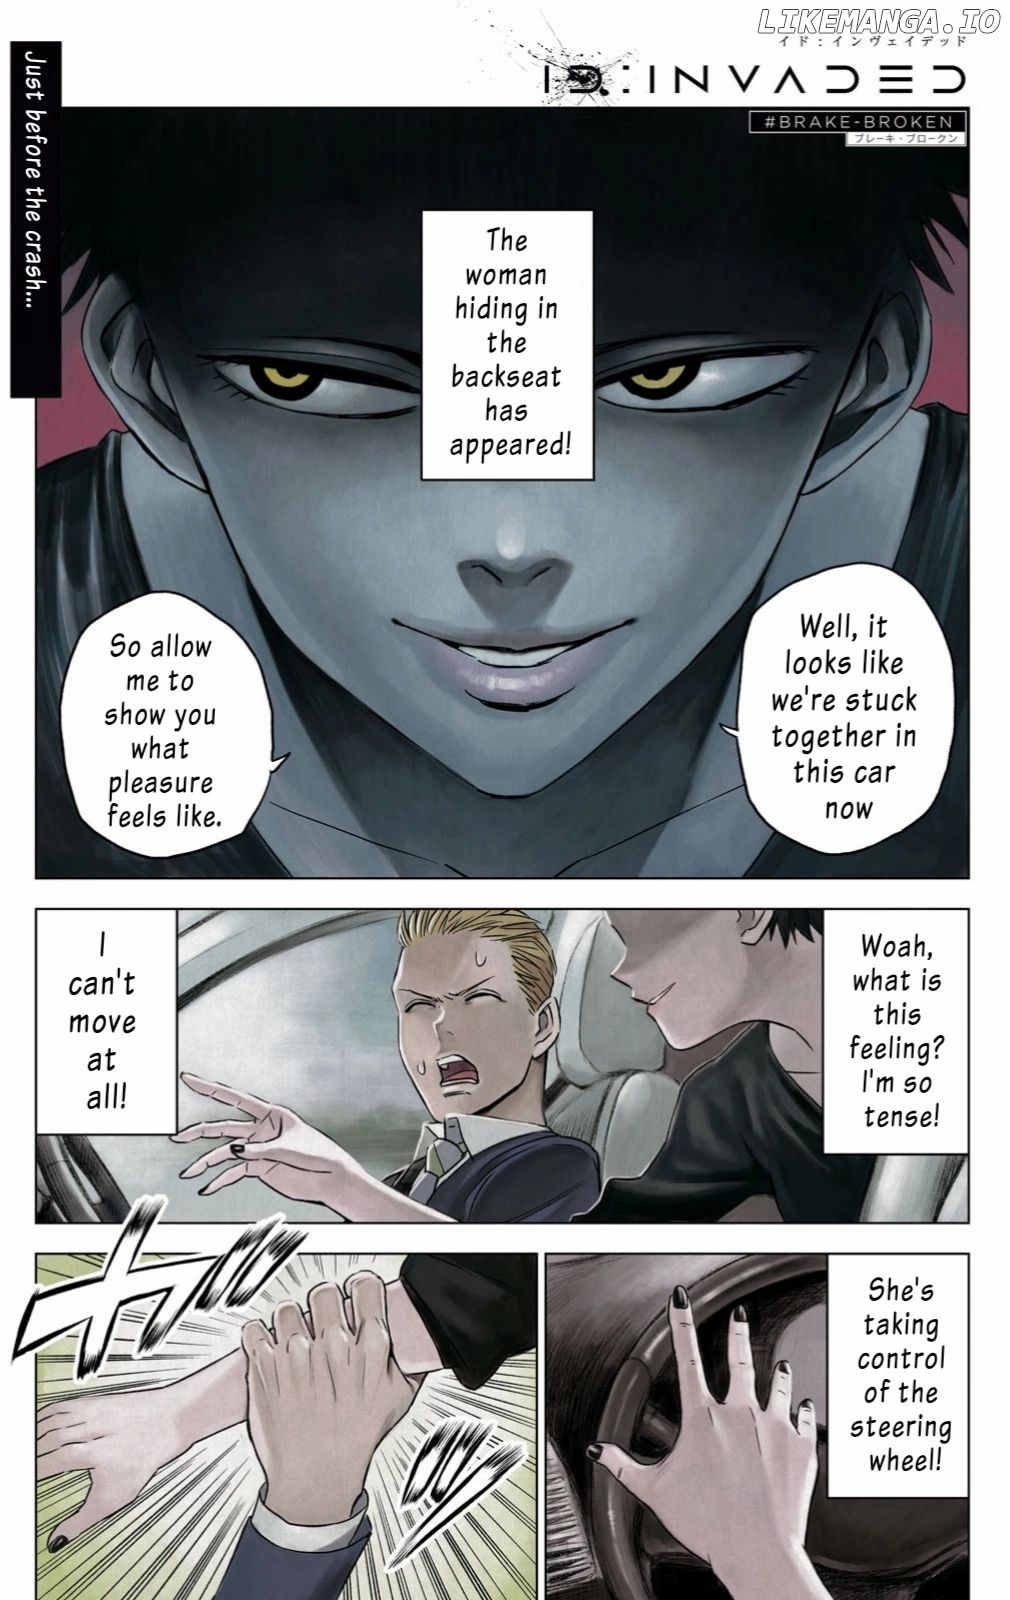 Id:invaded #brake Broken chapter 6 - page 1